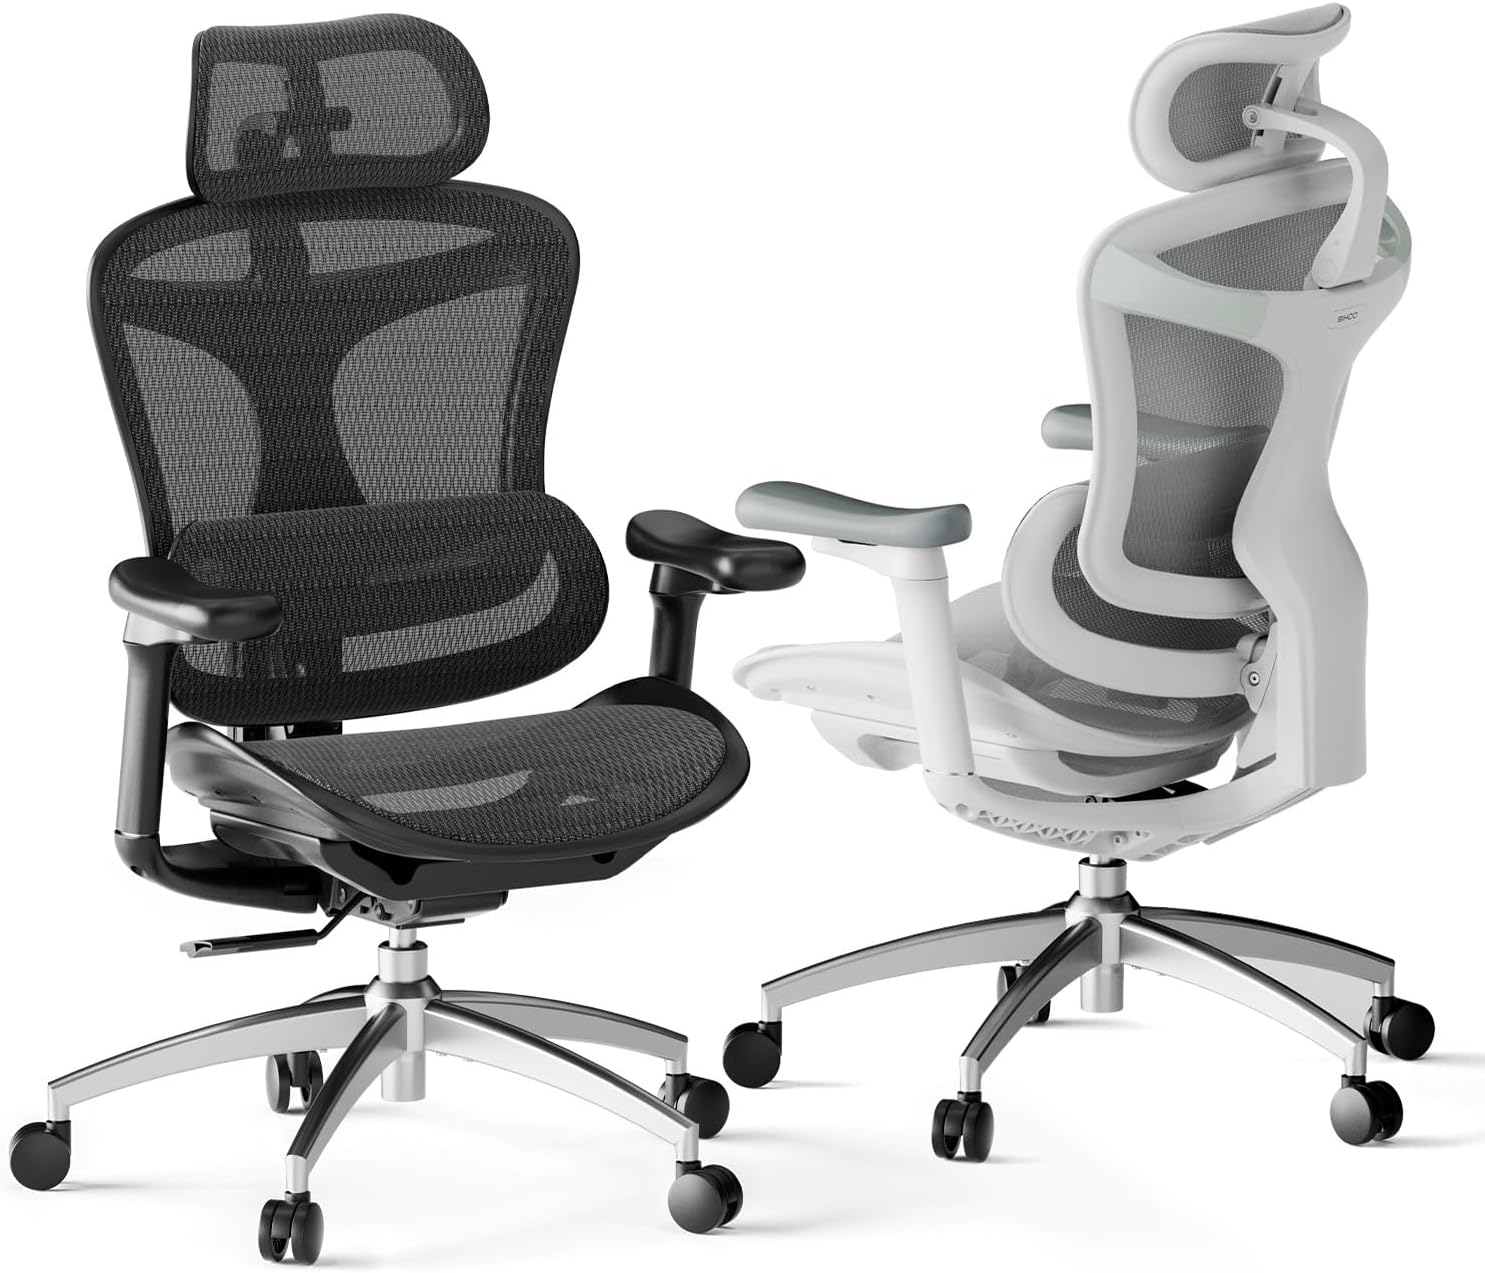 SIHOO Doro C300 Ergonomic Office Chair with Ultra Soft 3D Armrests, Dynamic Lumbar Support for Home Office Chair, Adjustable Backrest Desk Chair, Swivel Big and Tall Computer Chair Grey